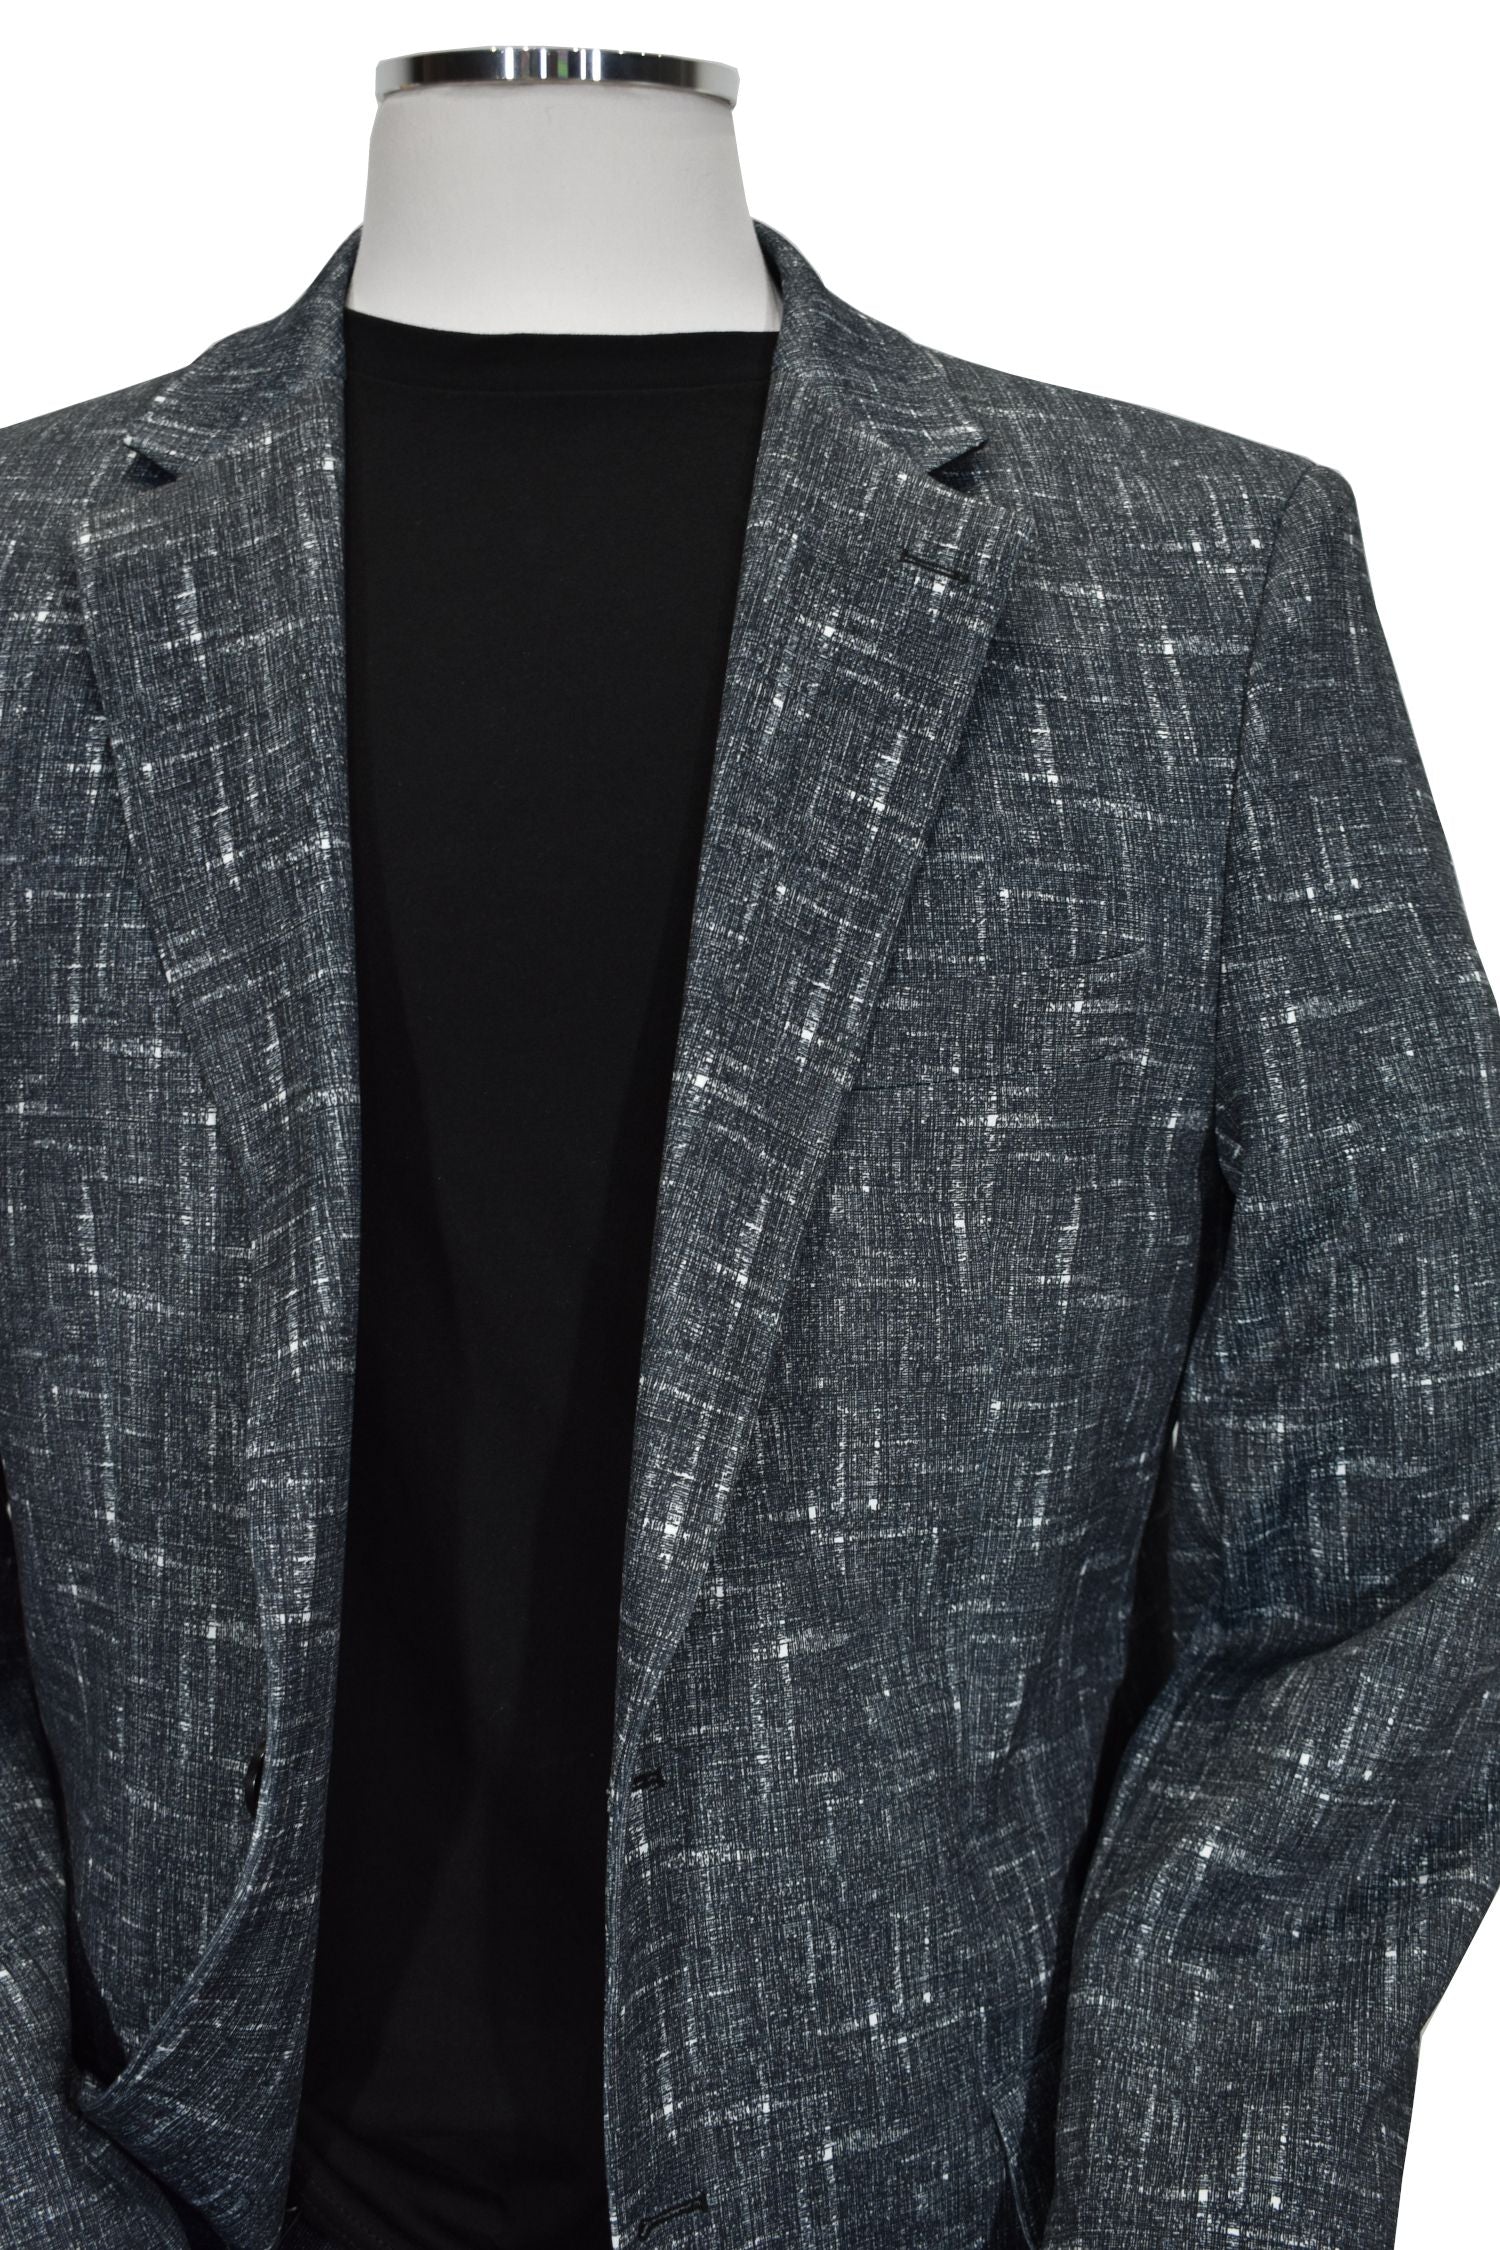 A traveler sport coat is a great item for a casual hip lifestyle. The outer fabric is a polyester microfiber with lycra for stretch. The result is a comfortable jacket that moves with your natural movements, does not wrinkle and can be folded up tight to travel anywhere without needing pressing.